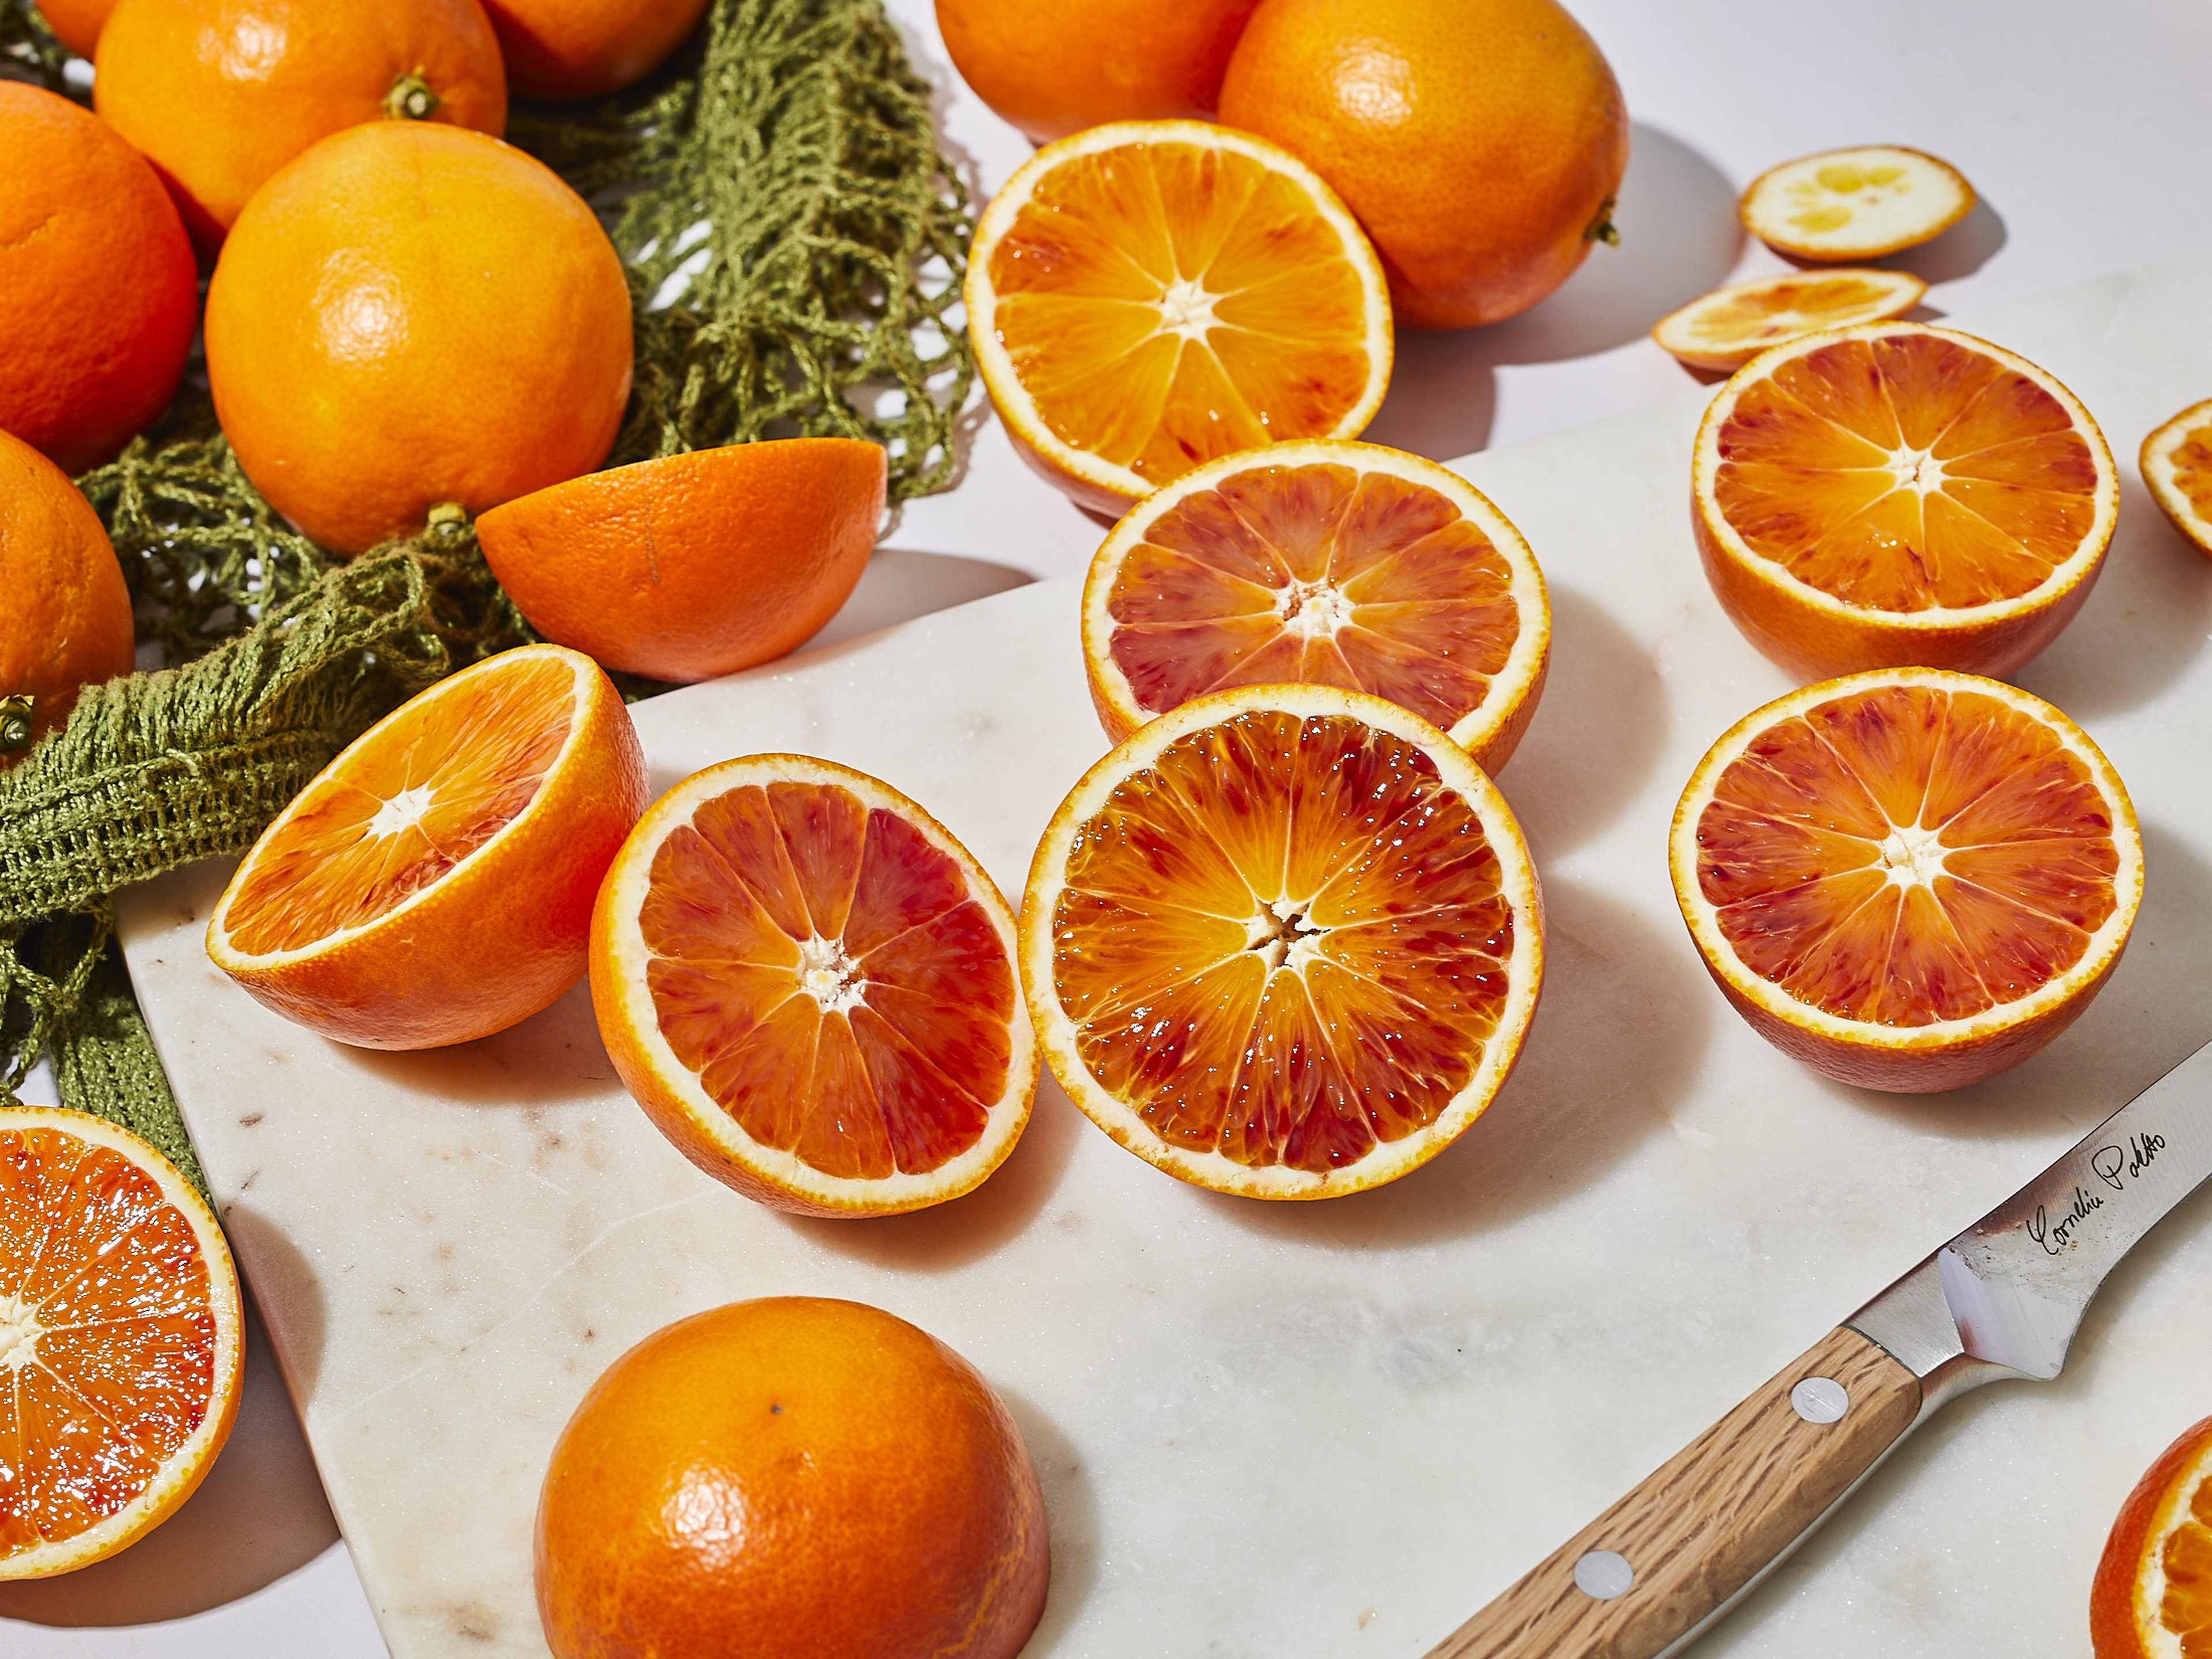 Blood oranges: What is the secret behind their color, and why do we love cooking with them?